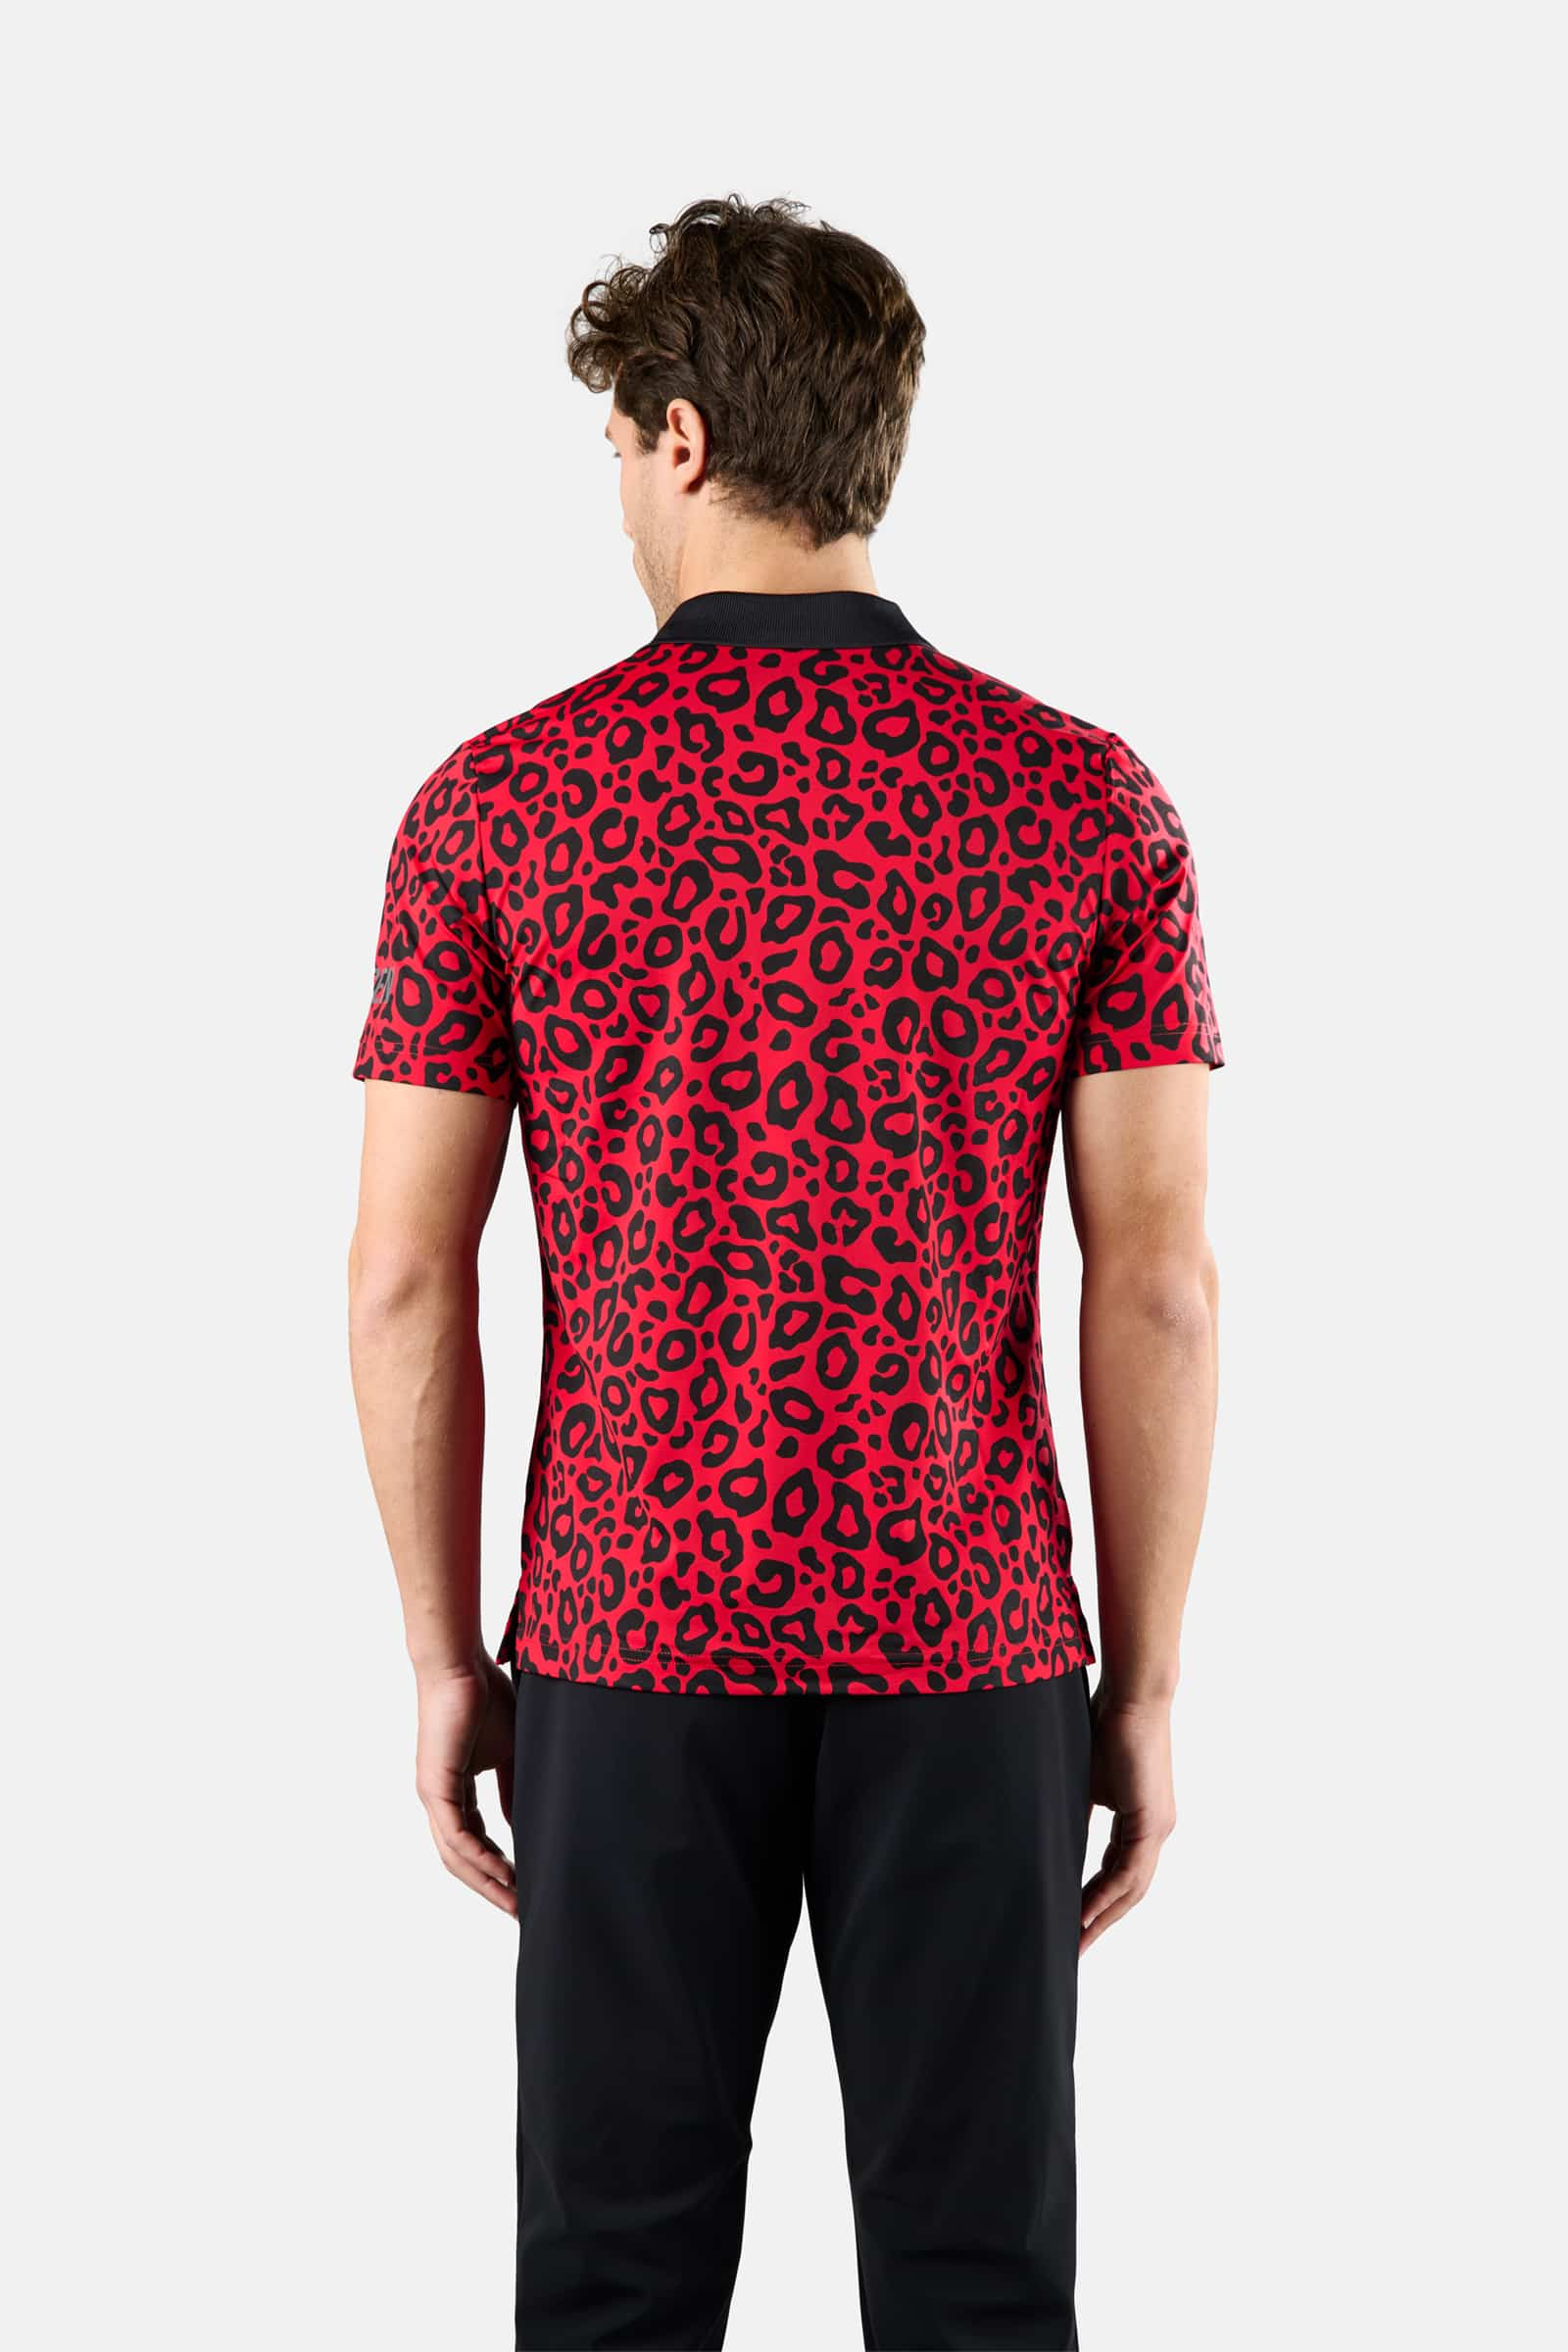 PRINTED POLO - RED PANTHER - Hydrogen - Luxury Sportwear